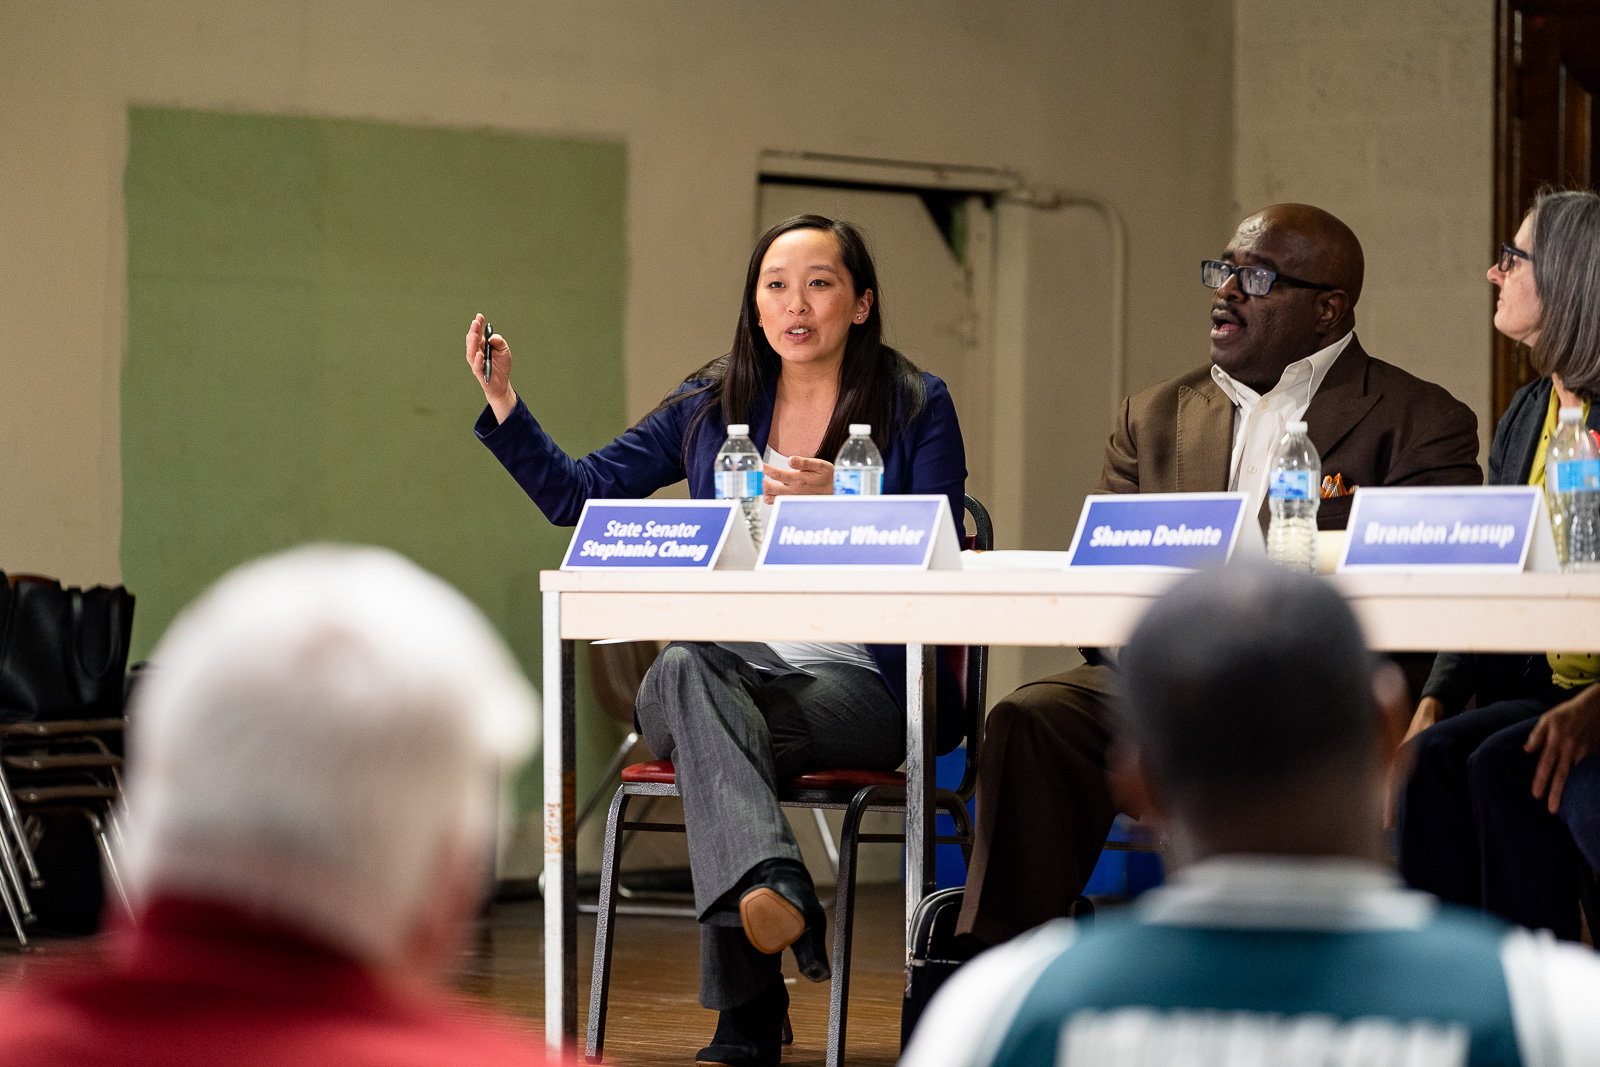 State Senator Stephanie Chang speaks at a Voting Rights and Elections Issues town hall